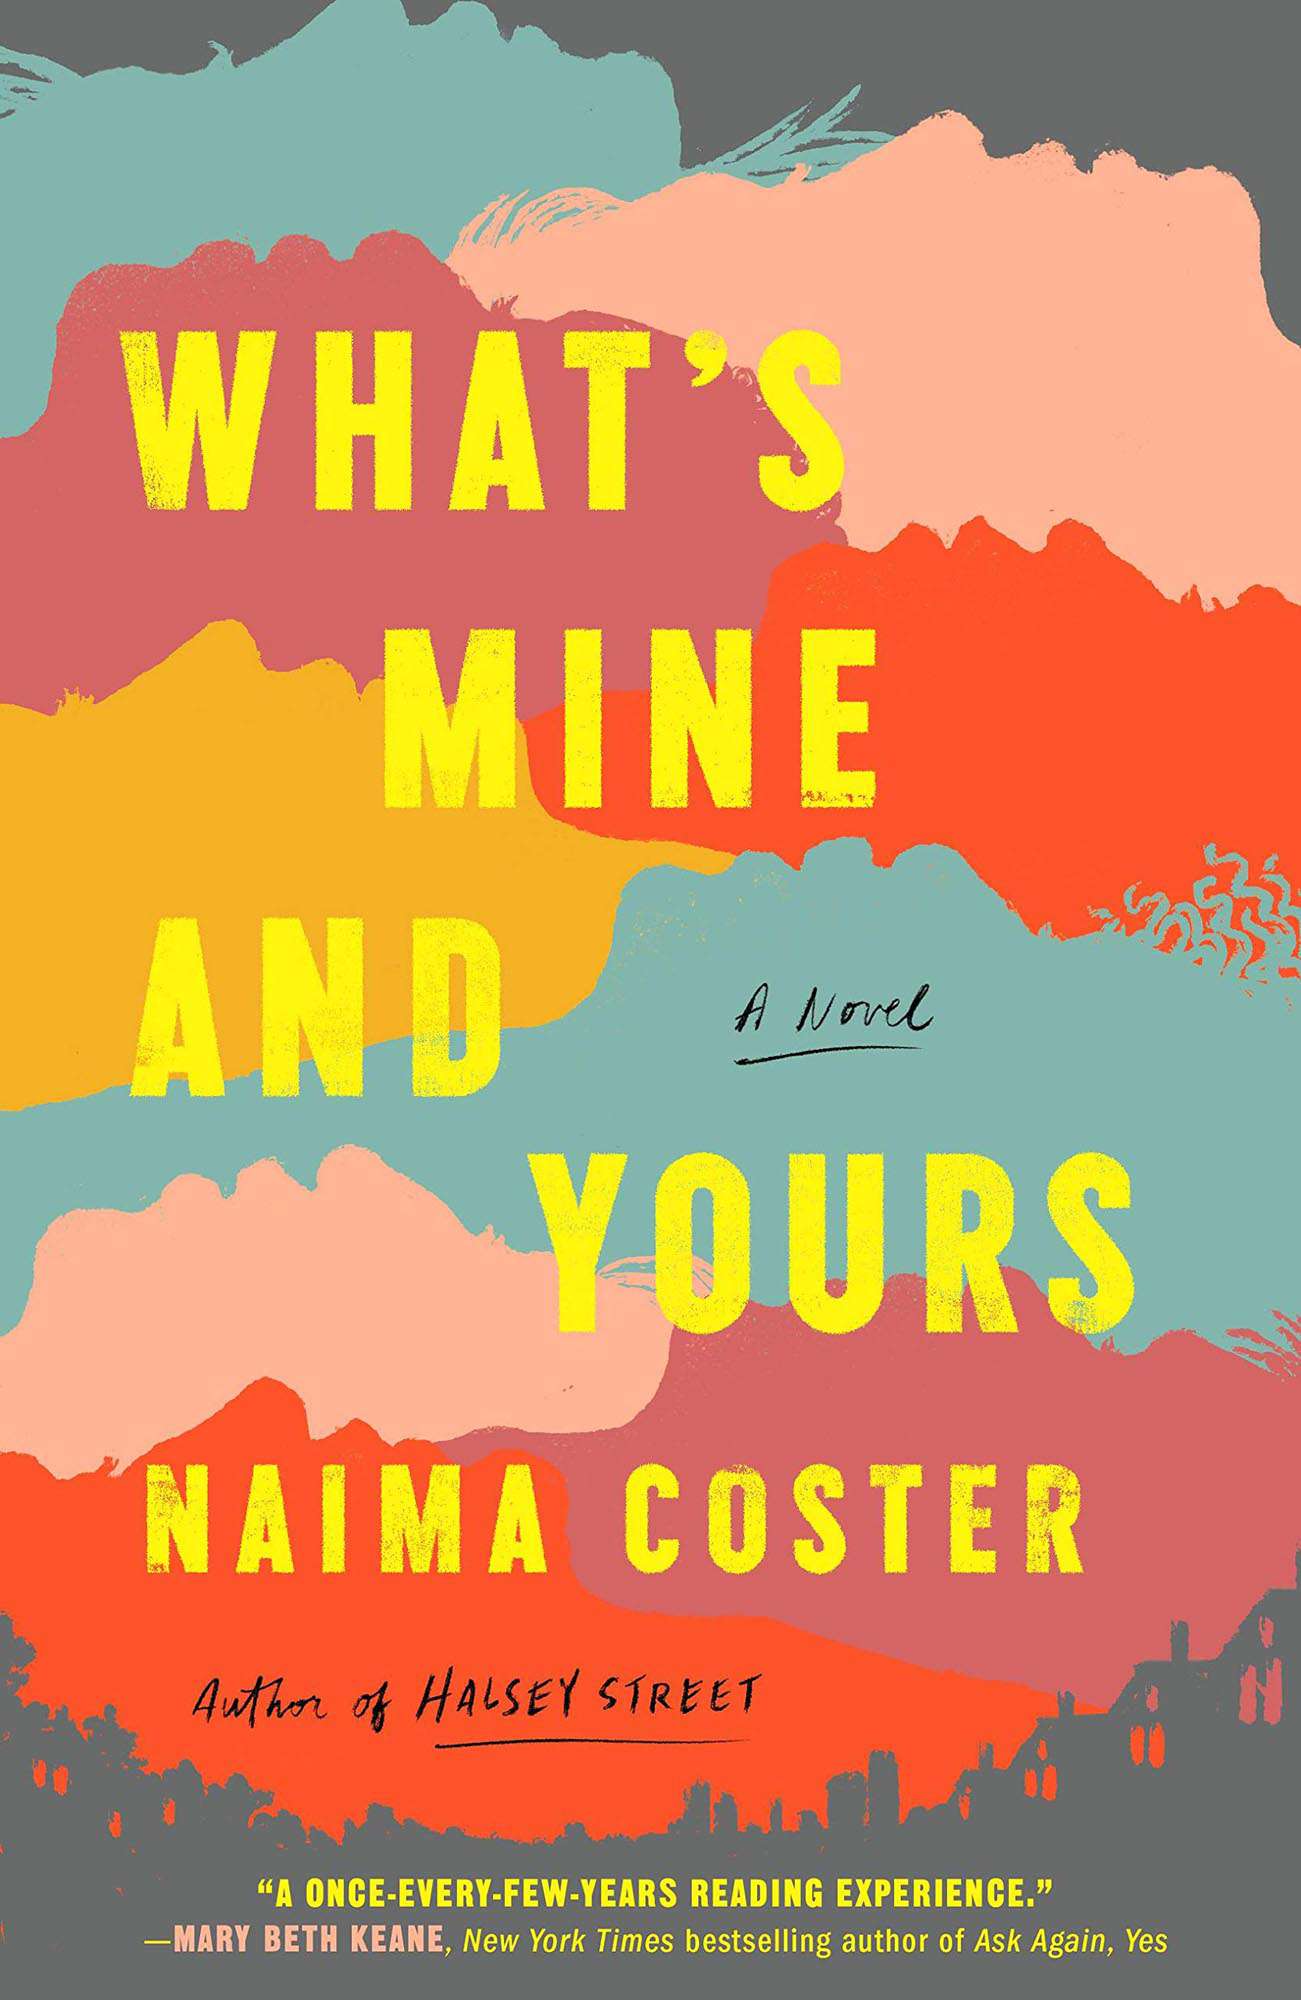 What's Mine and Yours, by Naima Coster